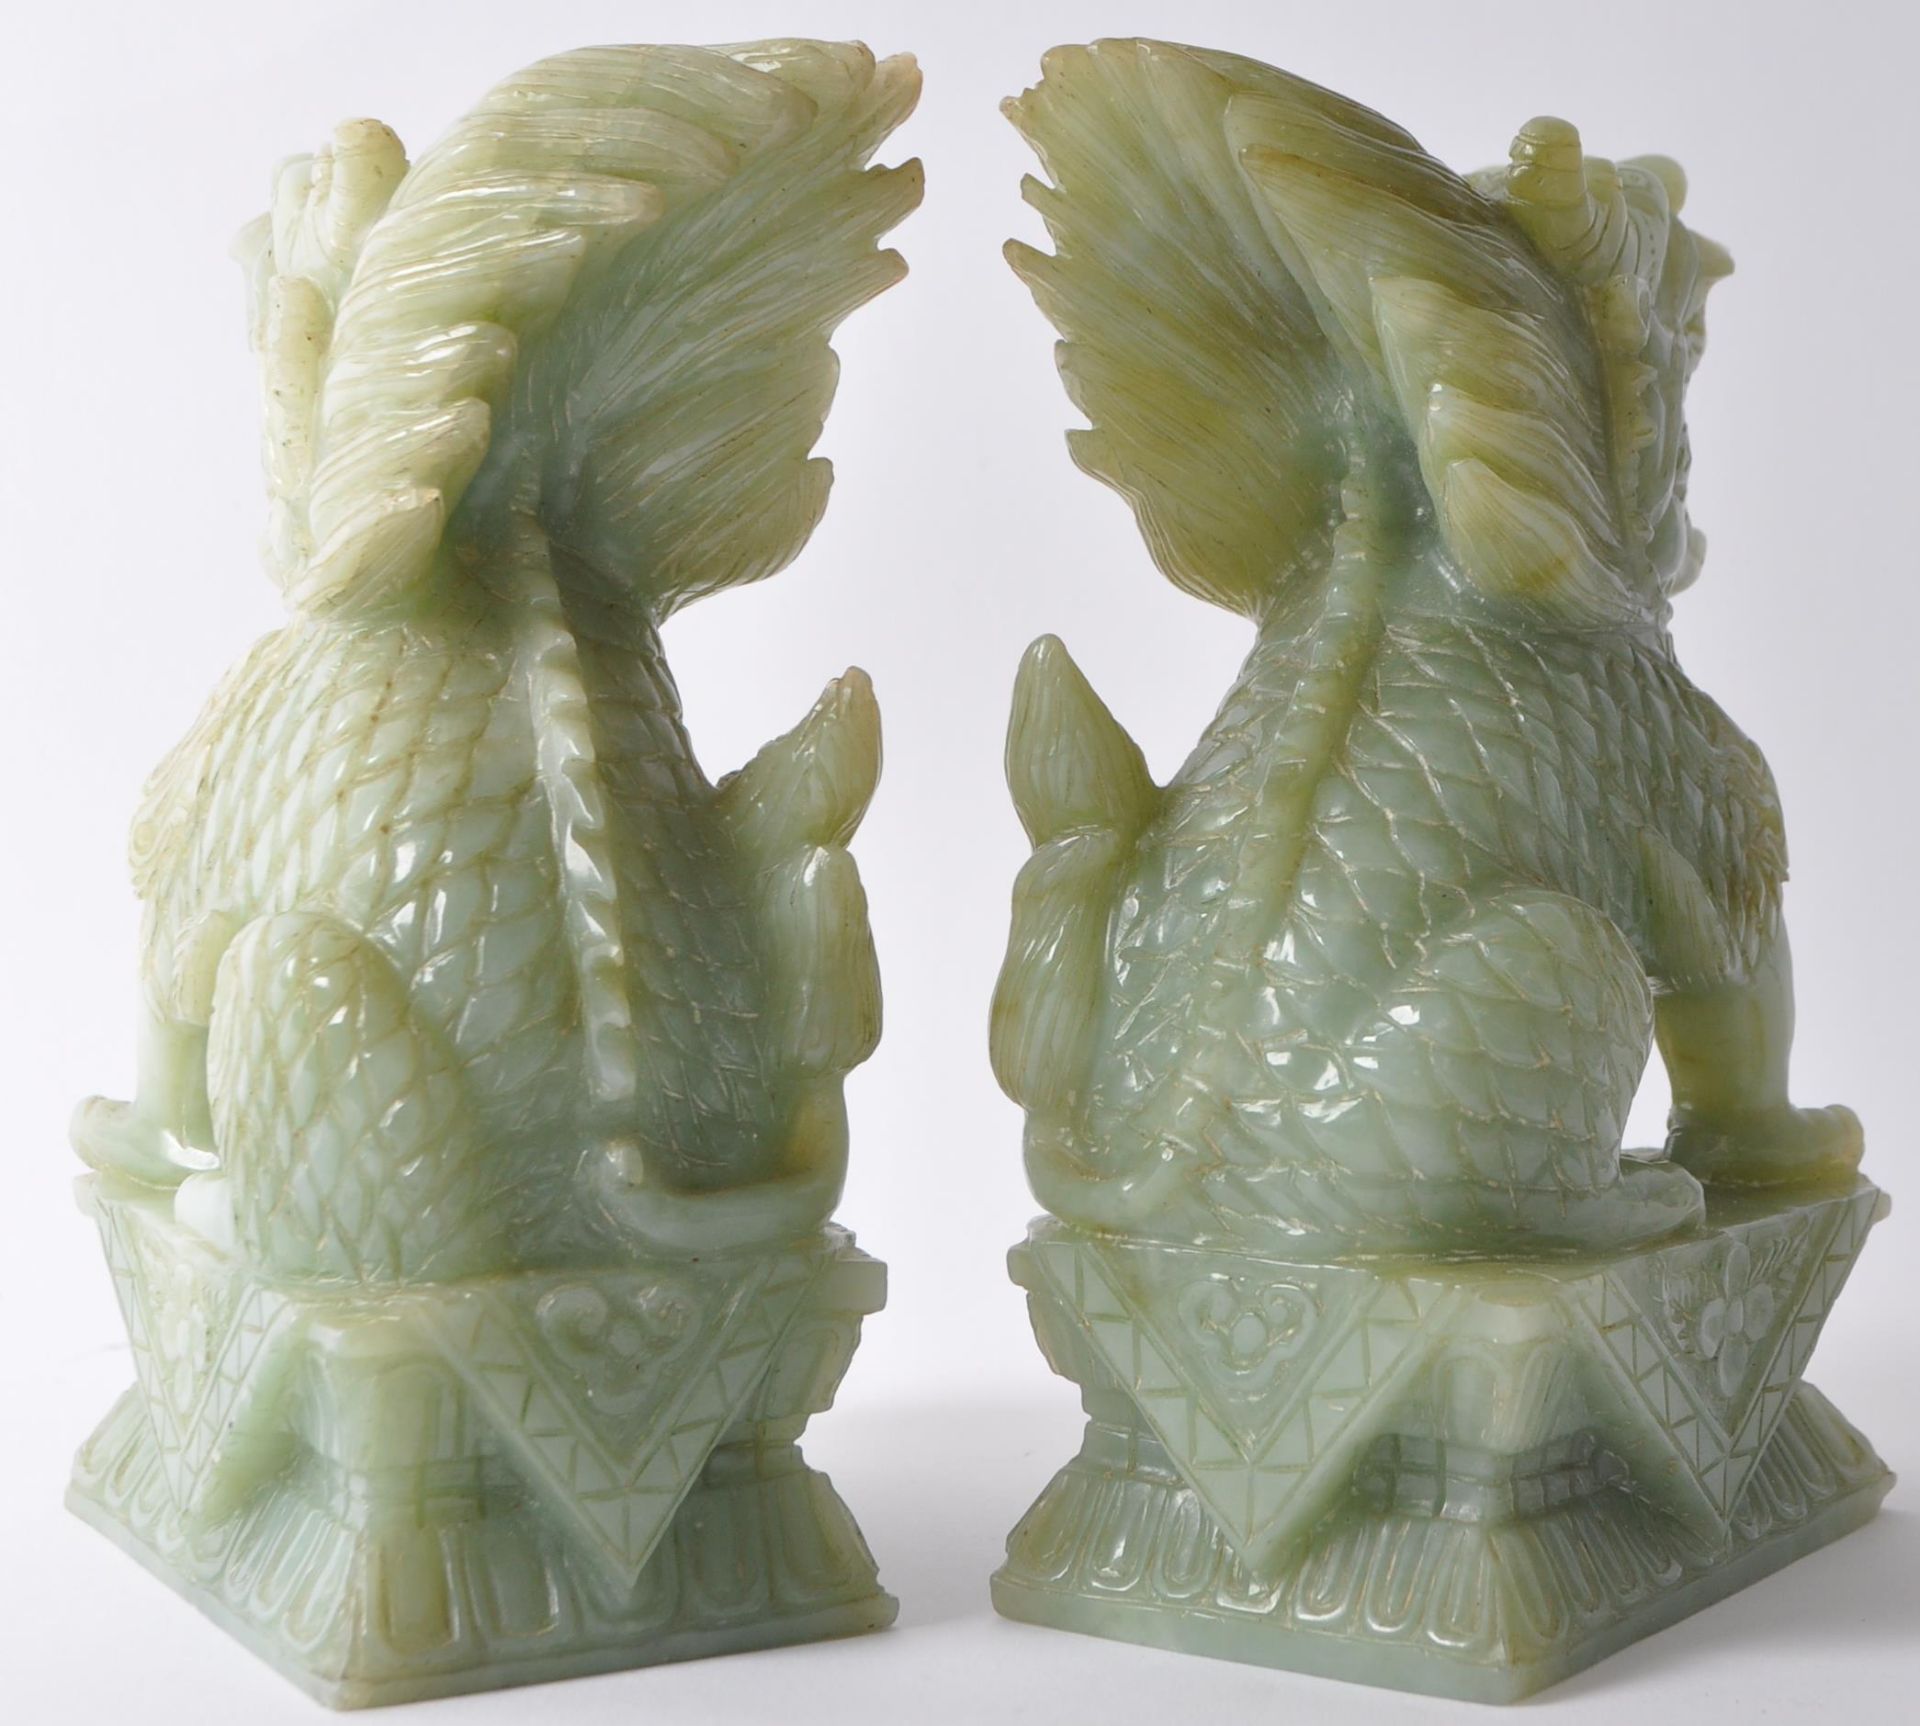 PAIR OF VINTAGE 20TH CENTURY CARVED STONE FU TEMPLE DOGS - Image 2 of 5